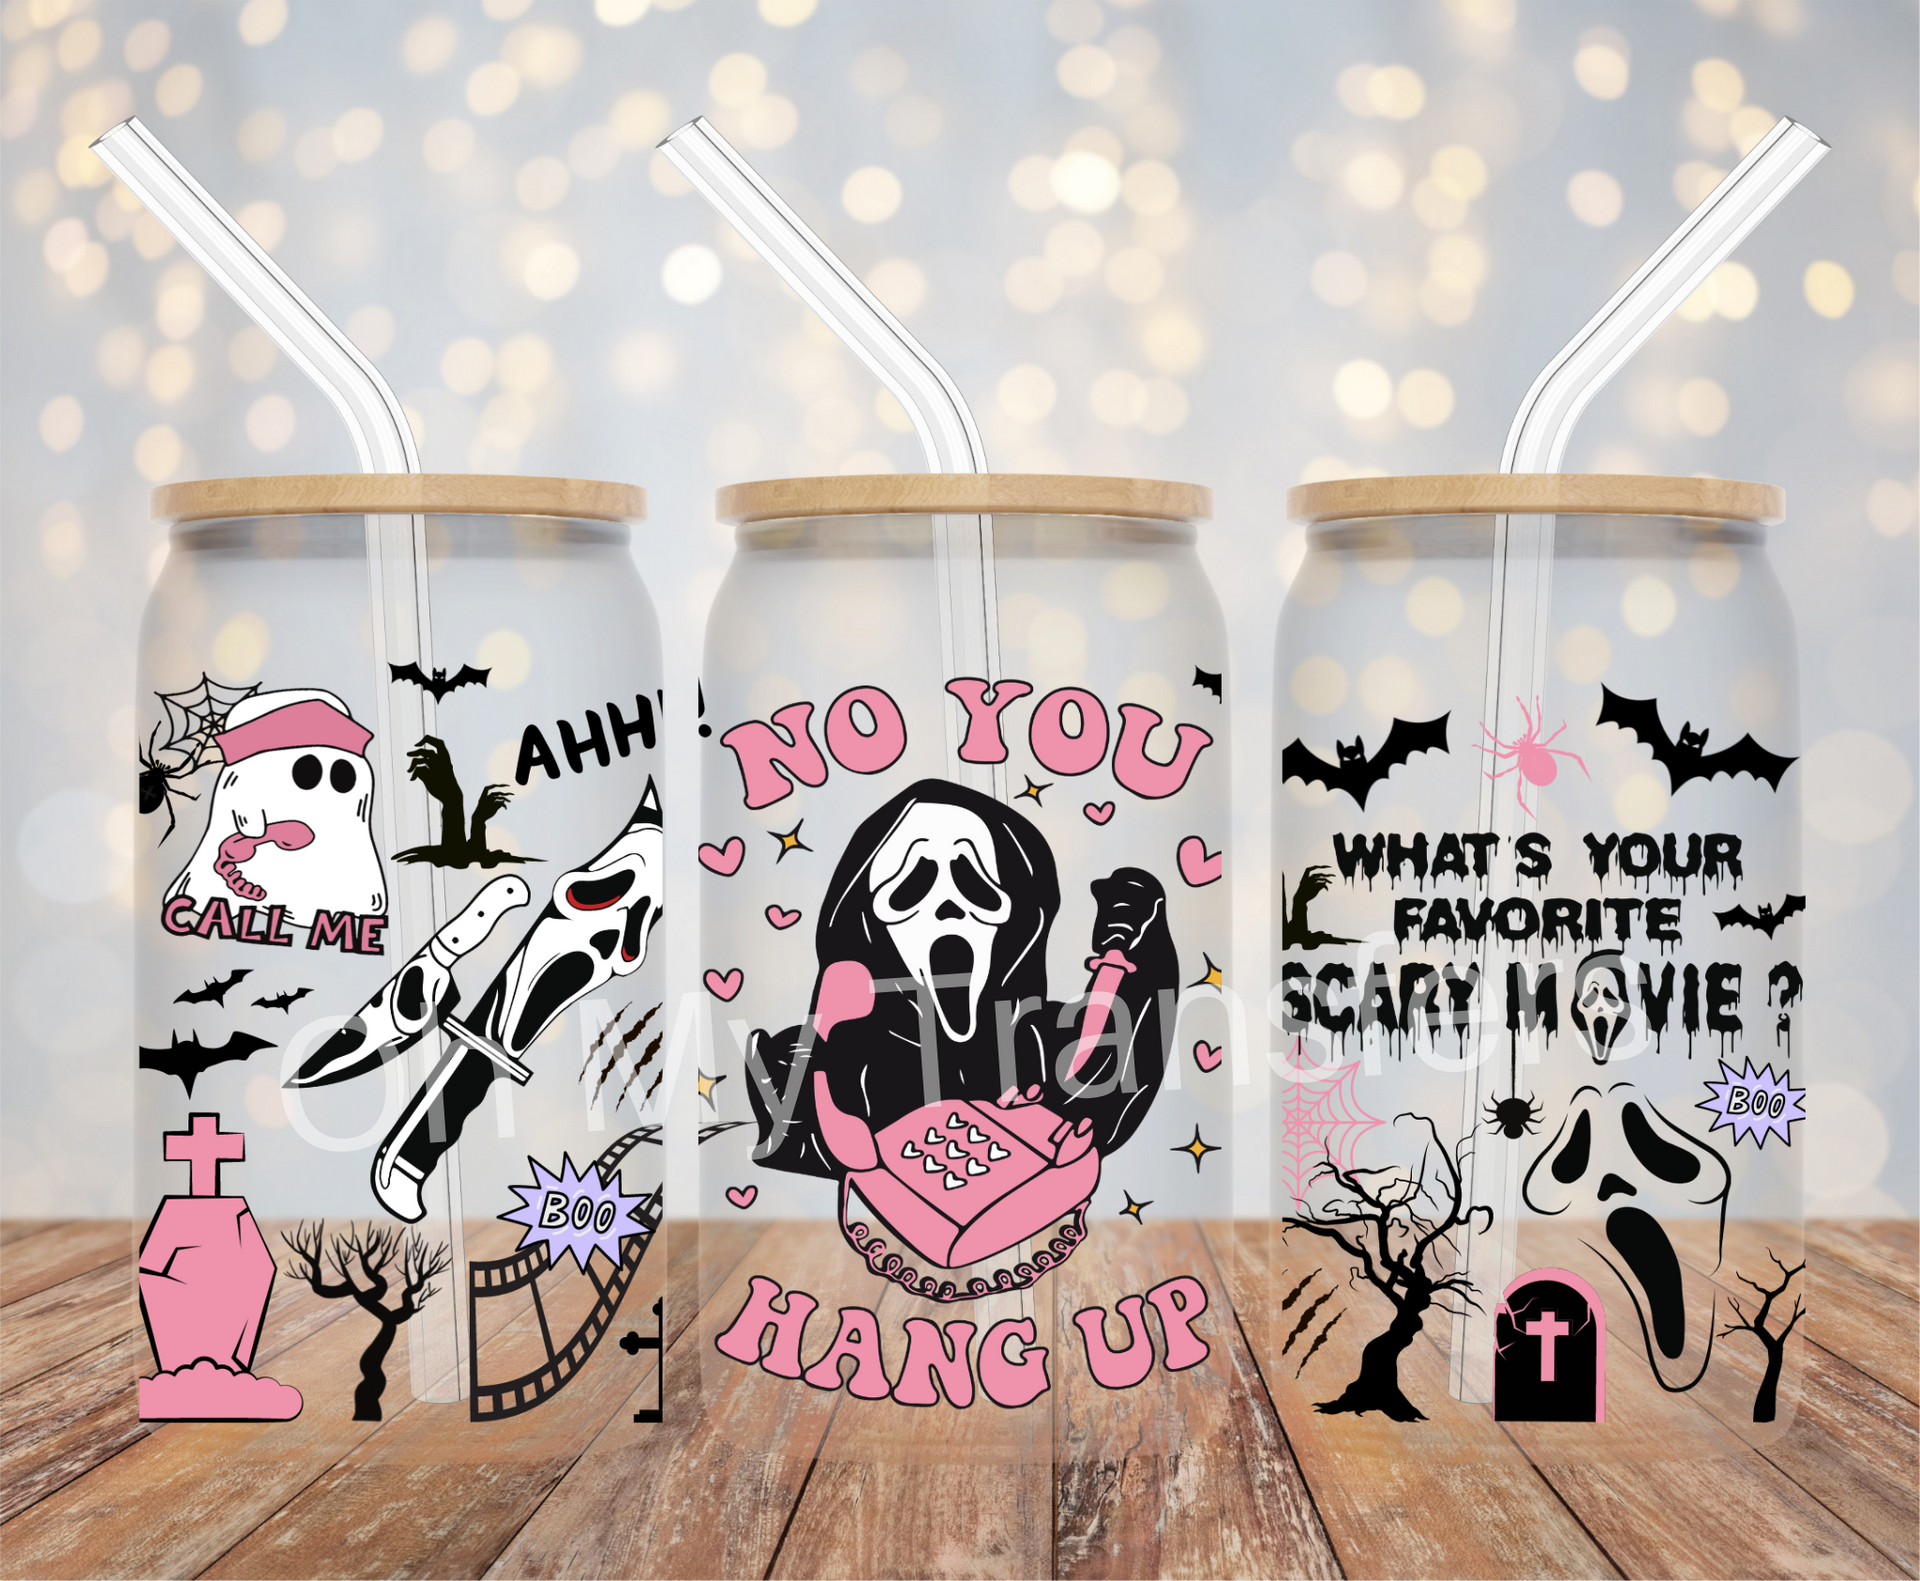 Ghostly Mouse and Bats UV-DTF Cup Wrap